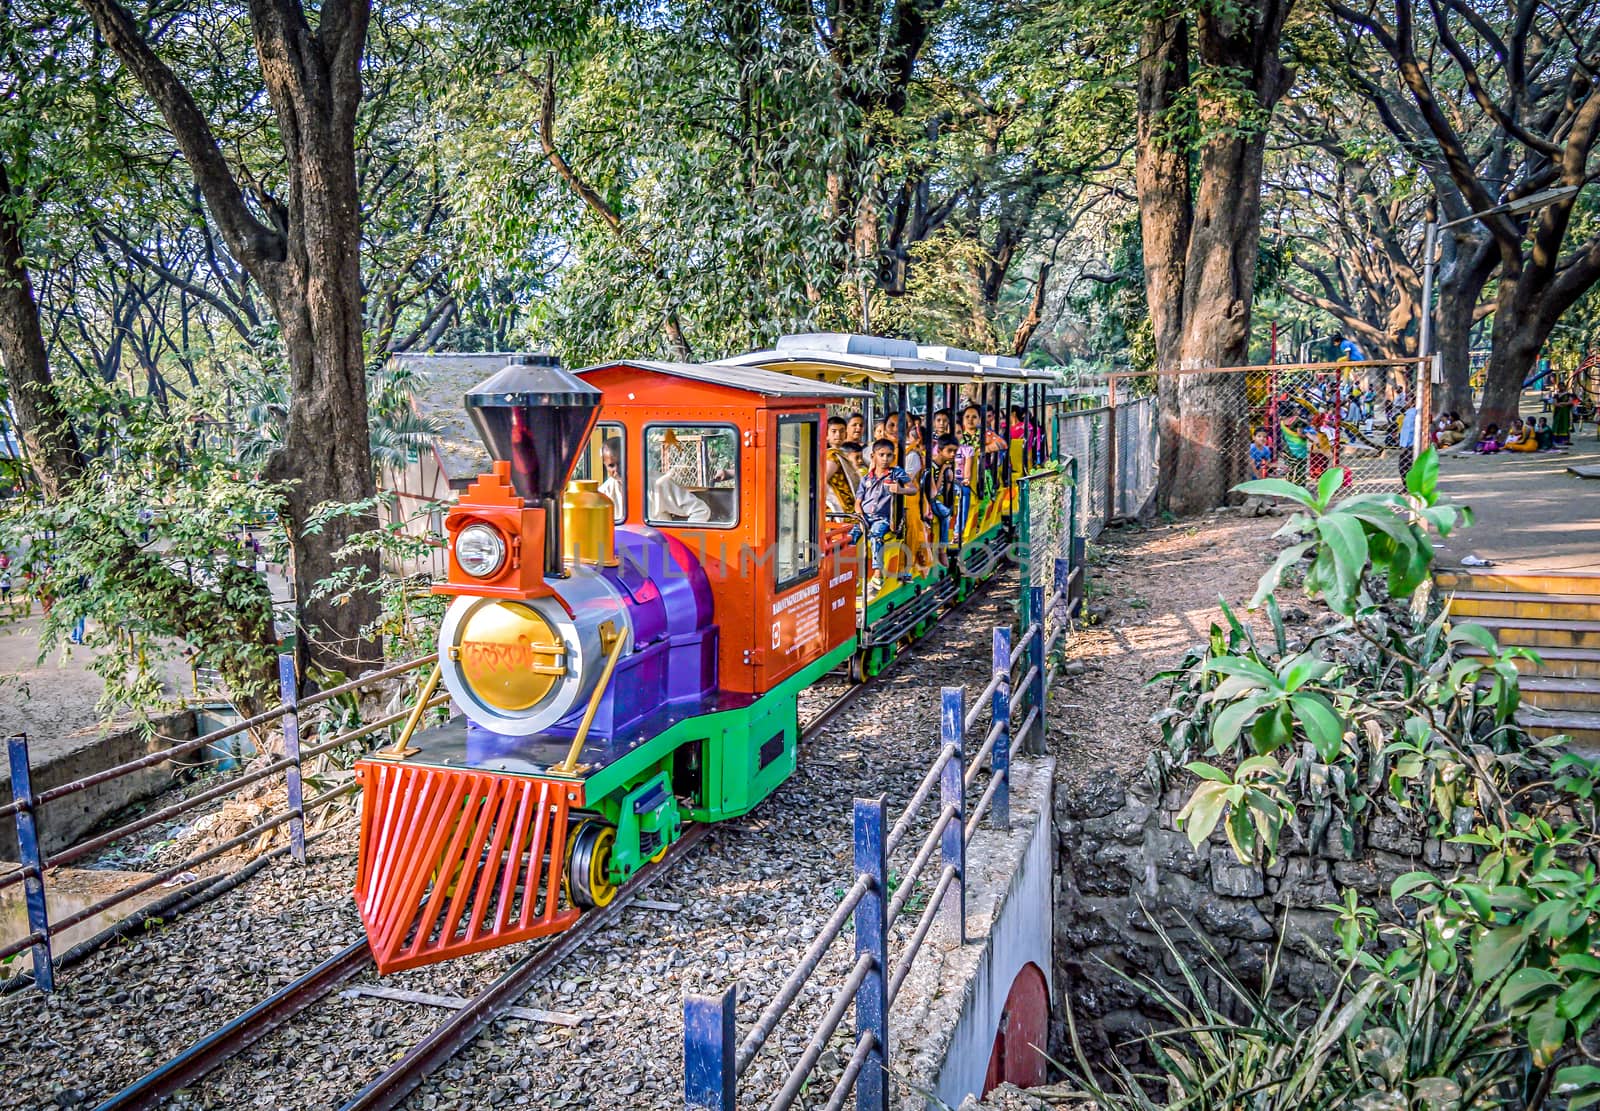 Chugging her way through decades, on the same loops and curves, the iconic toy train - fulrani , glistens in the bright sunlight, her vibrant blue, red, yellow and green colours beckoning the children to take a ride with her.